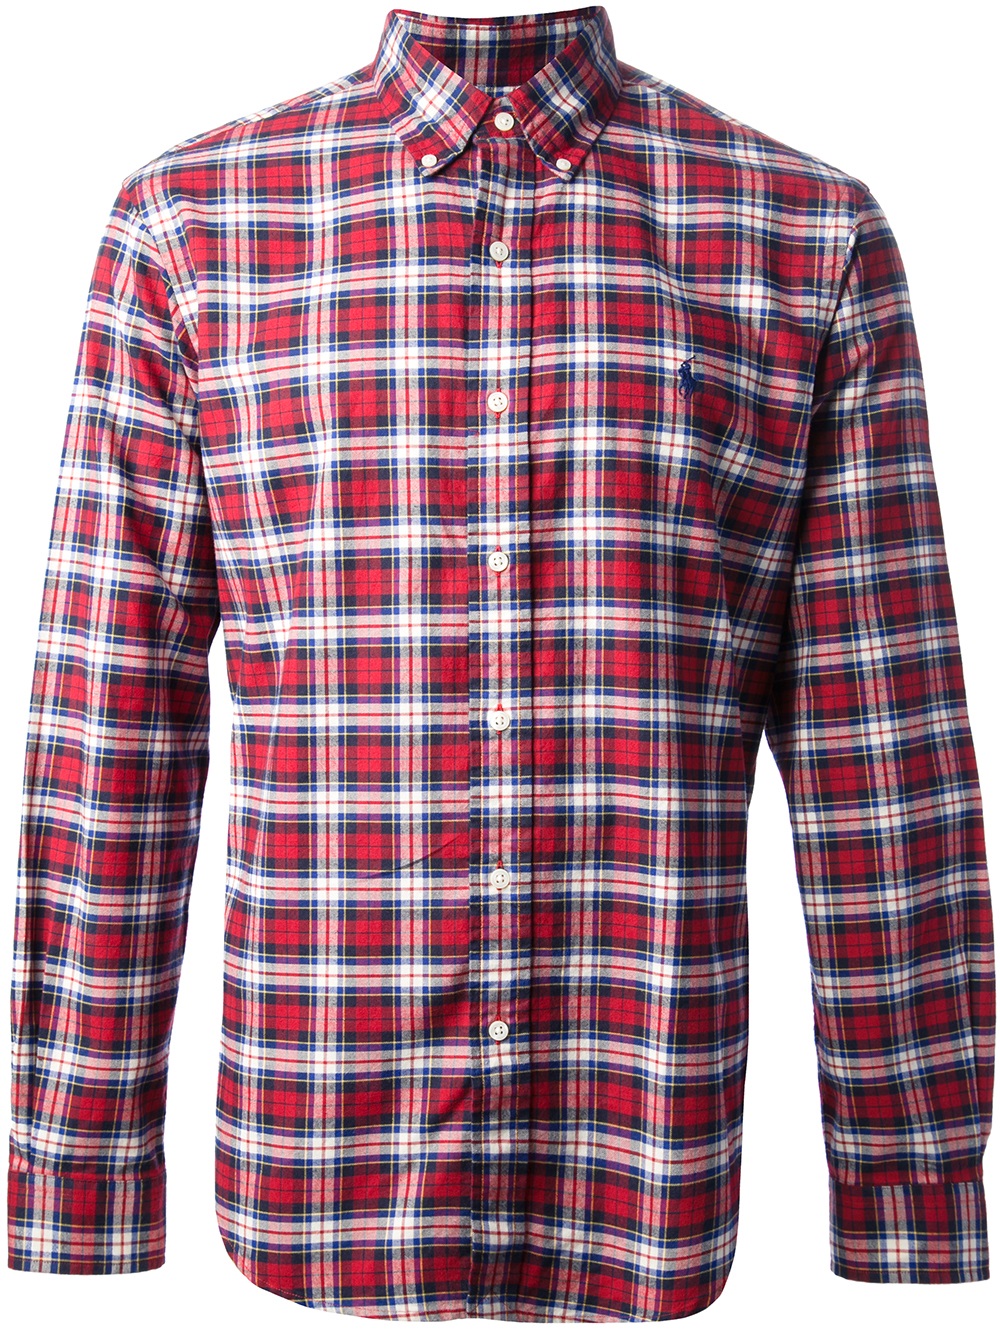 Lyst - Polo Ralph Lauren Checked Shirt in Red for Men